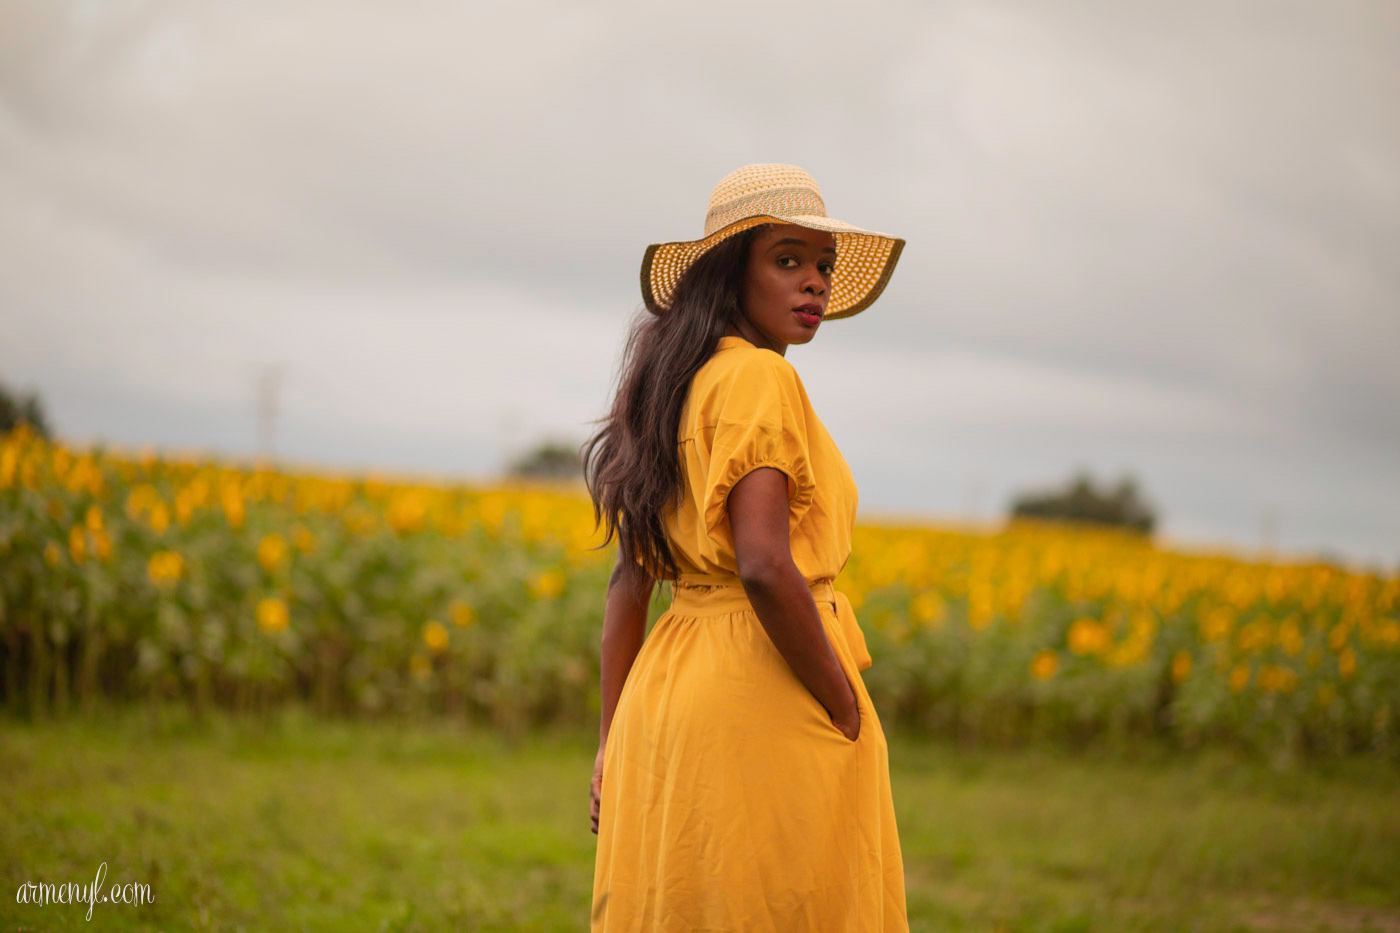 A fashion through travel Self Portrait series by Armenyl featuring the sunflower fields in Jarrettsville Maryland